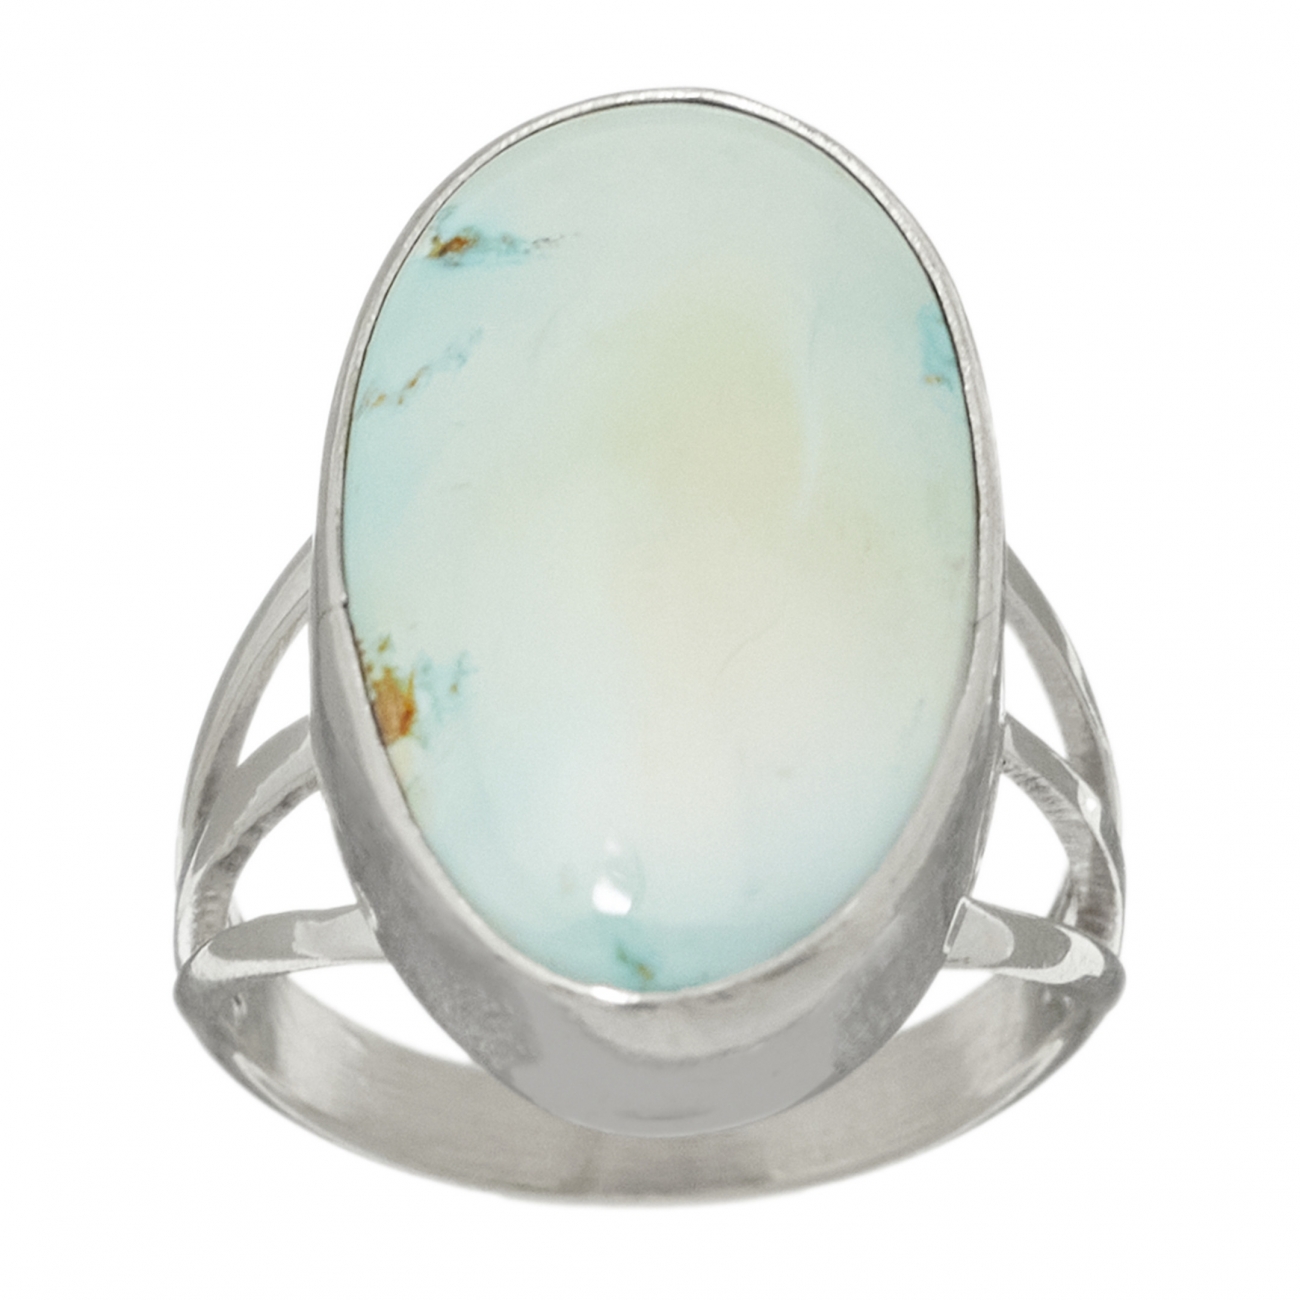 Navajo ring for women BA1032 in turquoise and silver - Harpo Paris